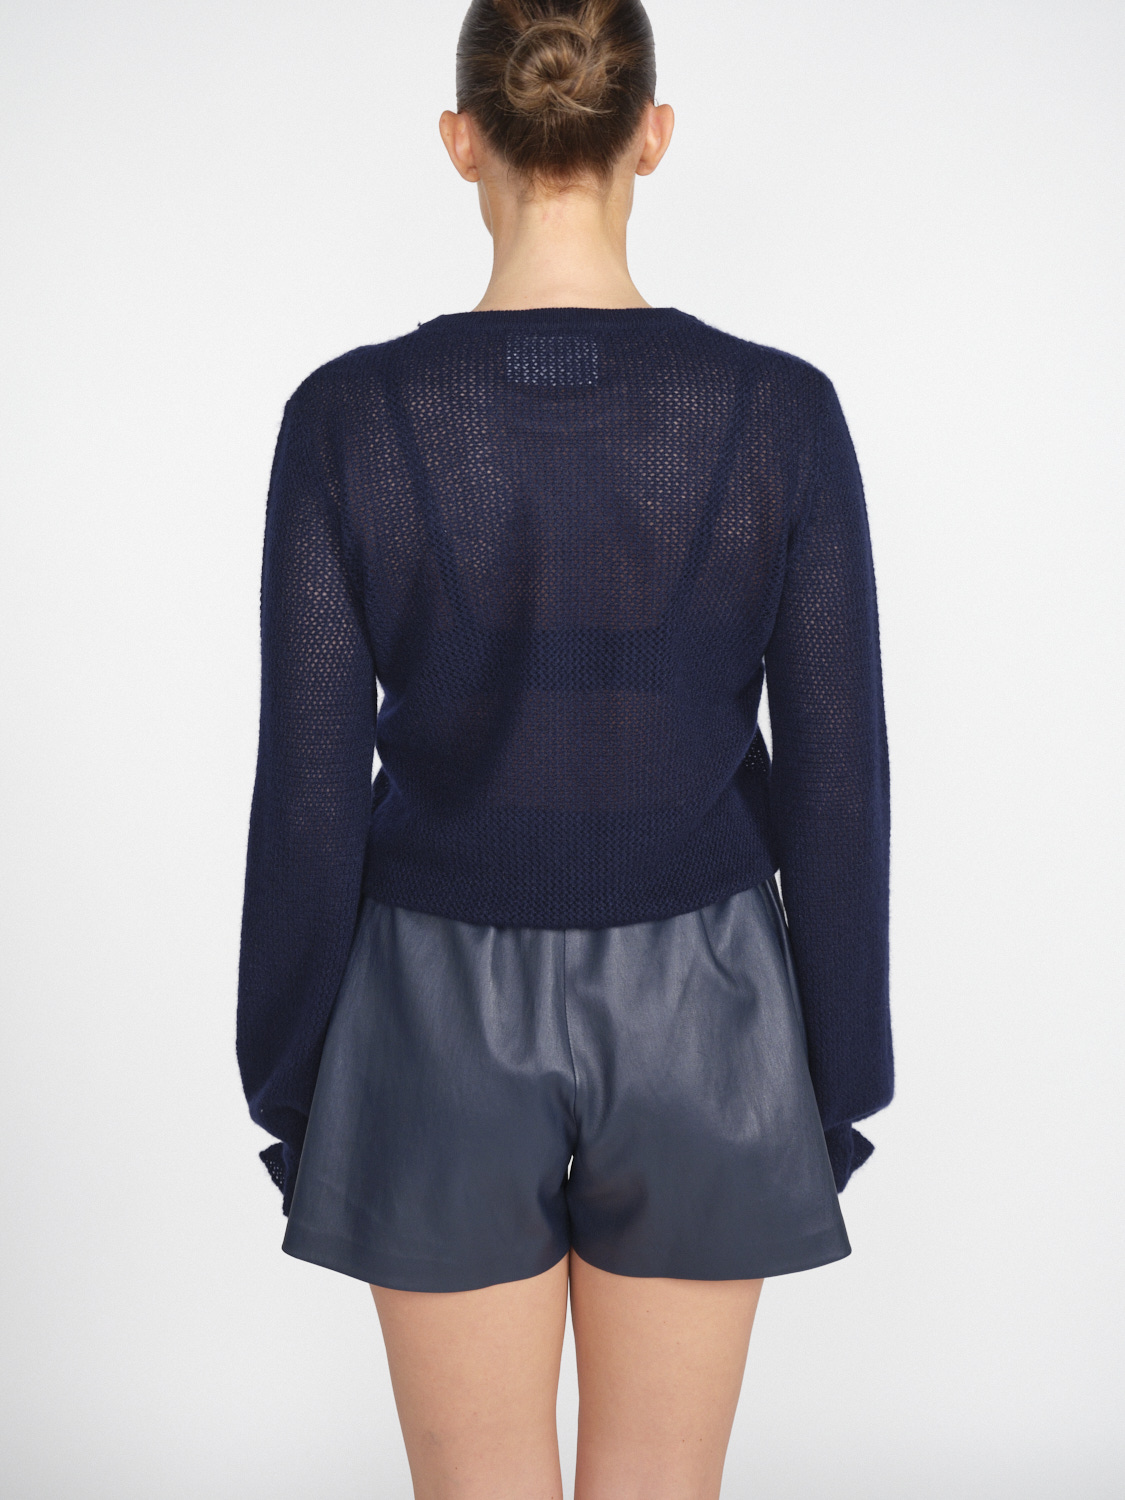 Lisa Yang Leanne - Maglia Ajour in cashmere  marine XS/S